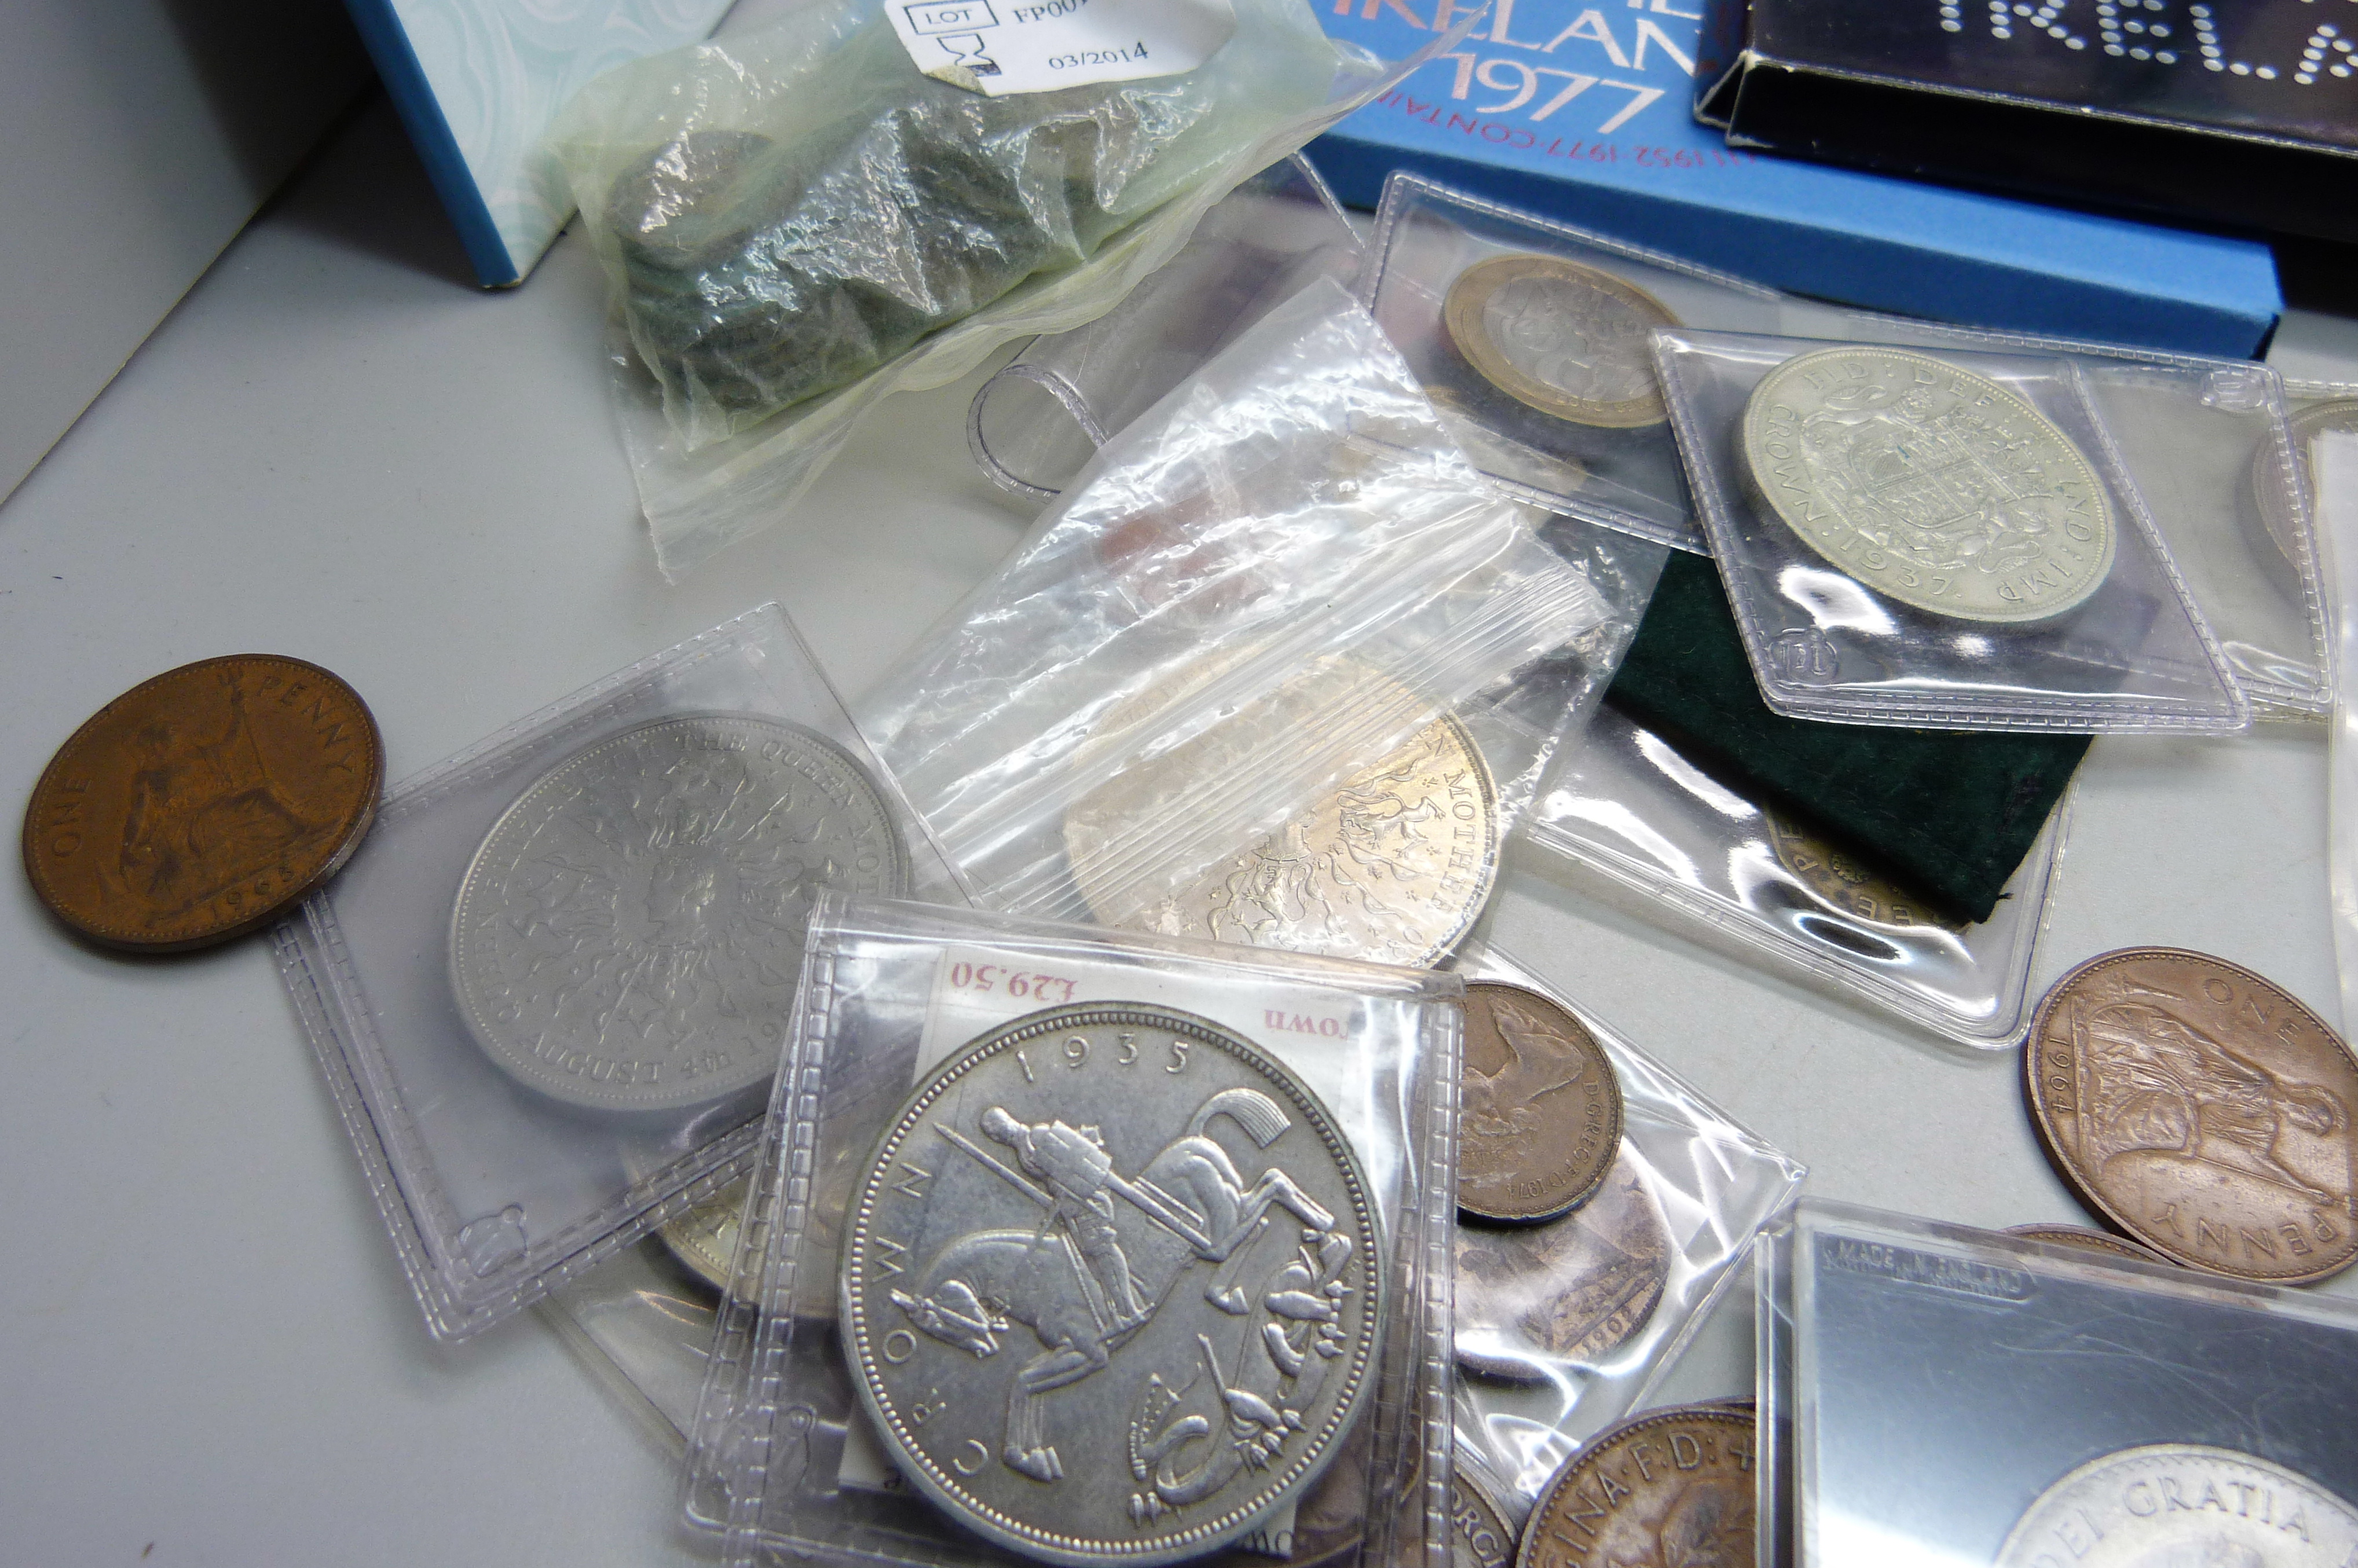 Coins; UK coin sets, commemorative crowns and other coins including 1935 and 1937 crowns - Image 4 of 6